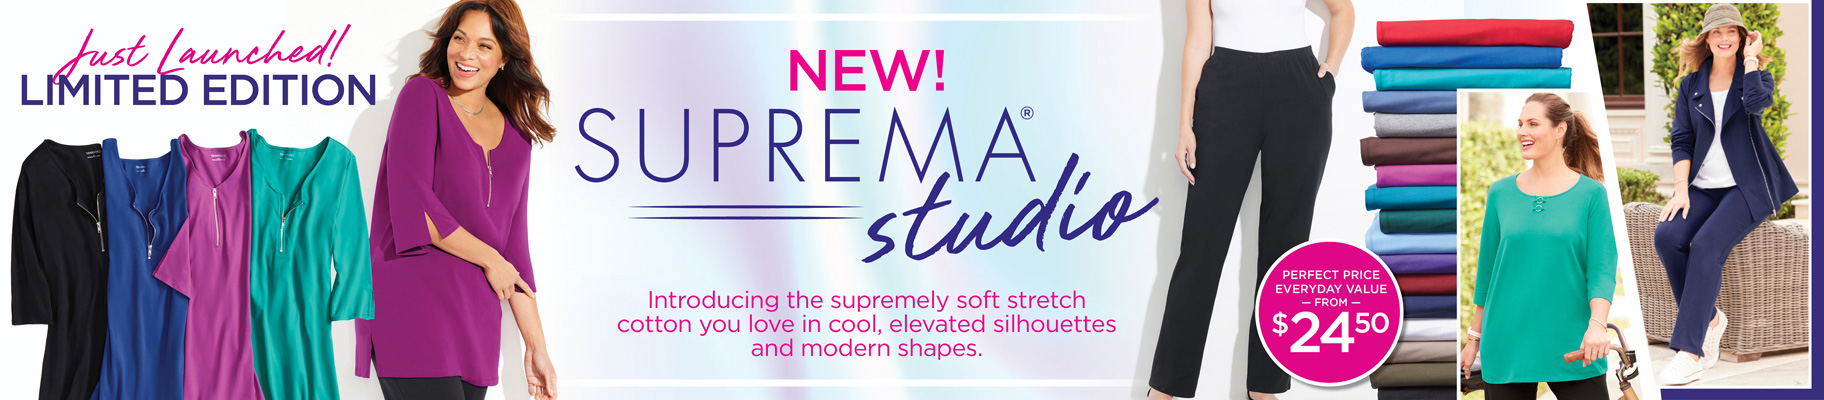 Just Launched! Limited Edition! NEW! Suprema Studio. Introducing the supremely soft stretch cotton you love in cool, elevated silhouettes and modern shapes.